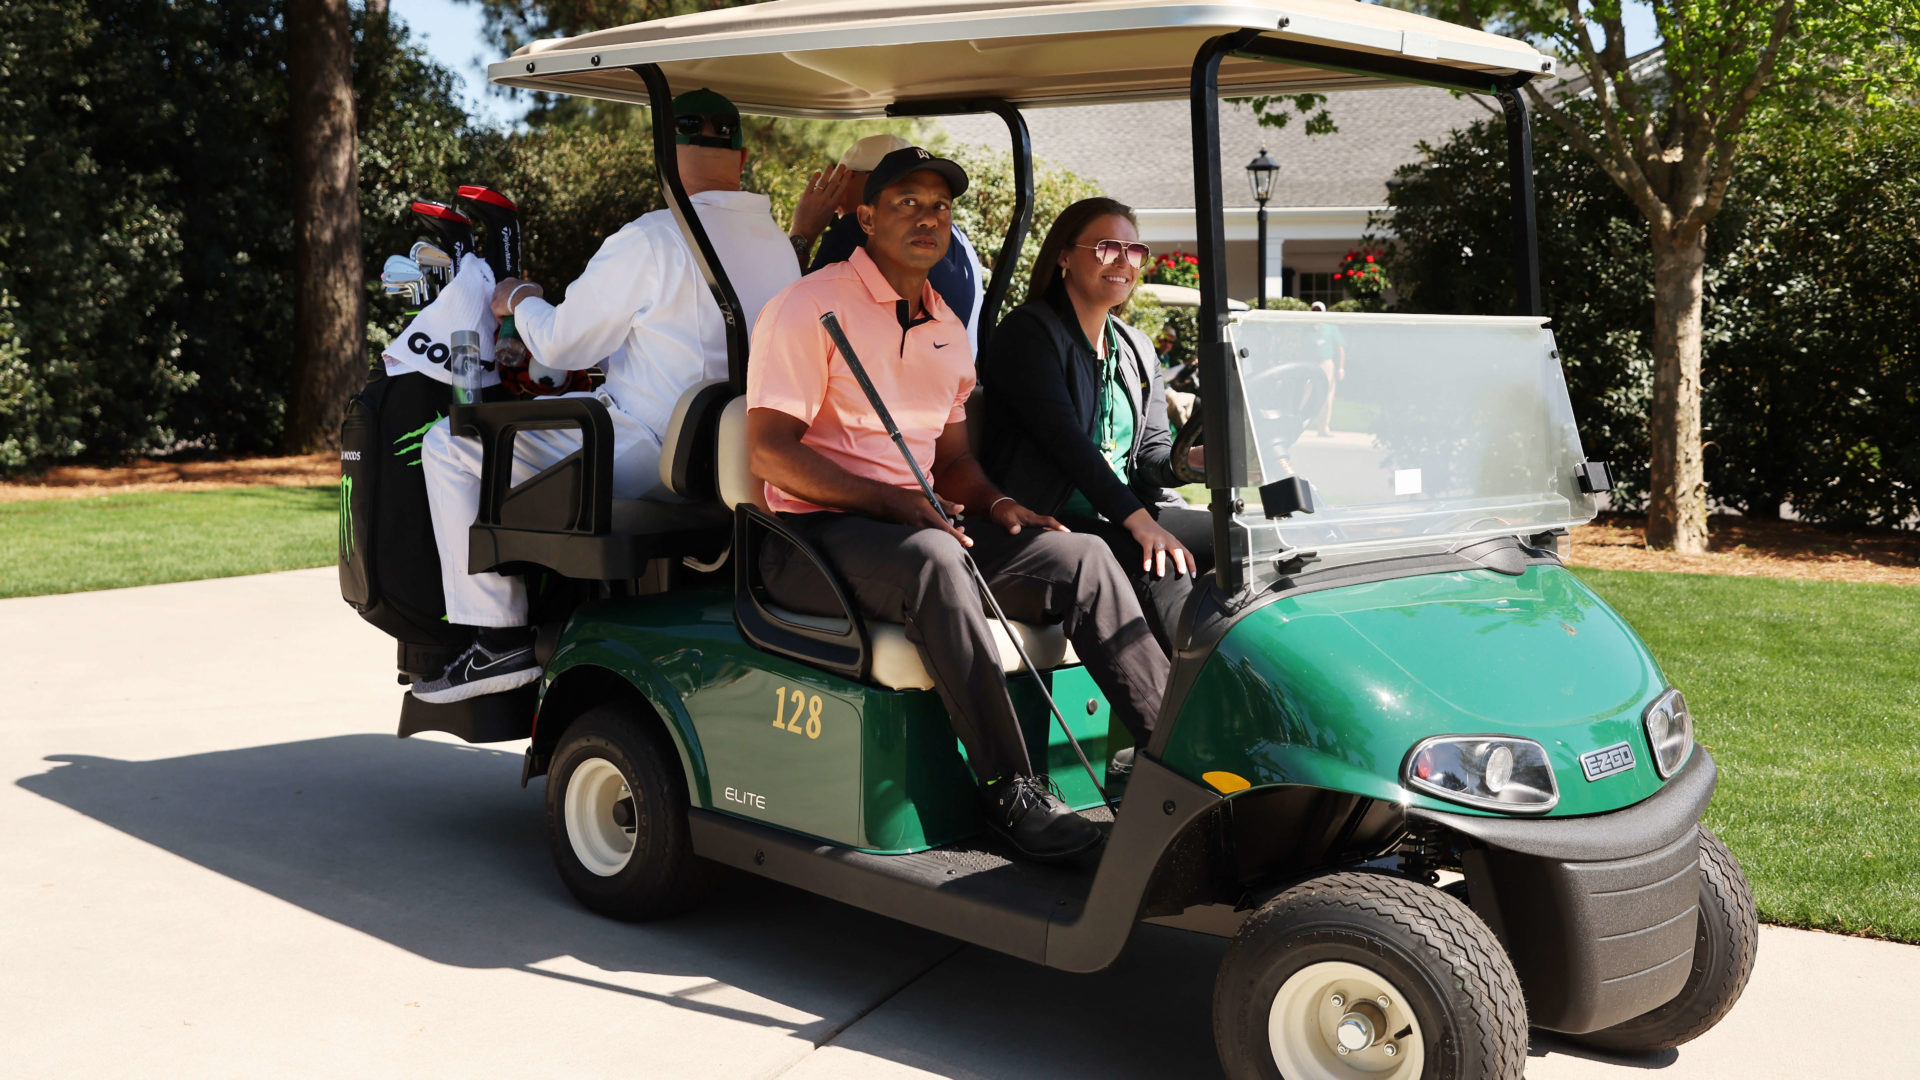 AUGUSTA, GEORGIA - APRIL 03: Tiger Woods of the United States departs the practice area prior to the Masters at Augusta National Golf Club on April 03, 2022 in Augusta, tour news Georgia. (Photo by Gregory Shamus/Getty Images)